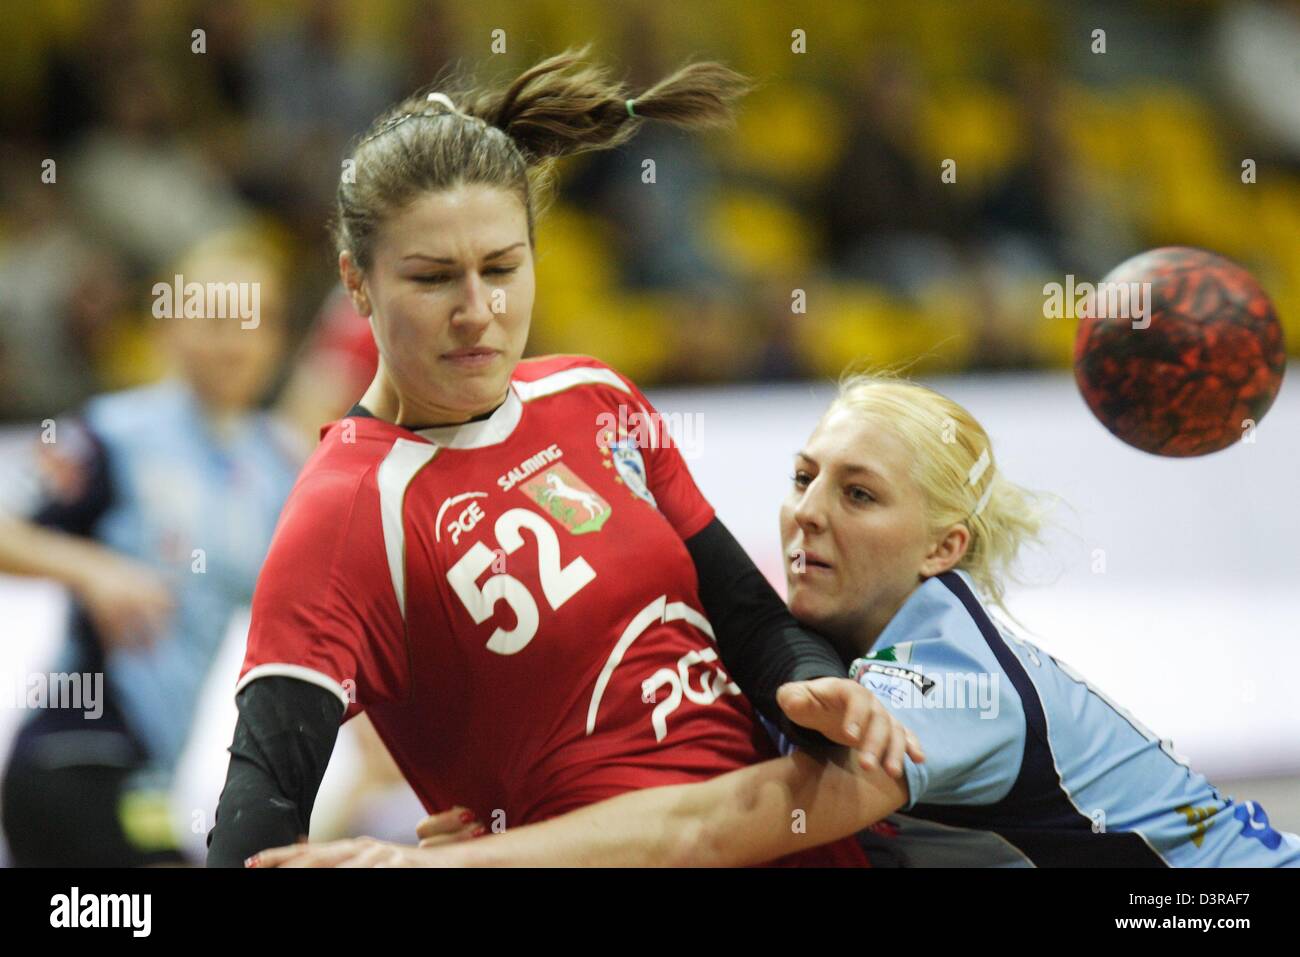 Gdynia, Poland 23rd, February 2013 Handball: Final Four of the PGNiG Polish Cup. SPR Lublin v KPR Ruch Chorzow game at HSW sports hall in Gdynia. Alina Wojtas (52) in action during the game. Credit:  Michal Fludra / Alamy Live News Stock Photo